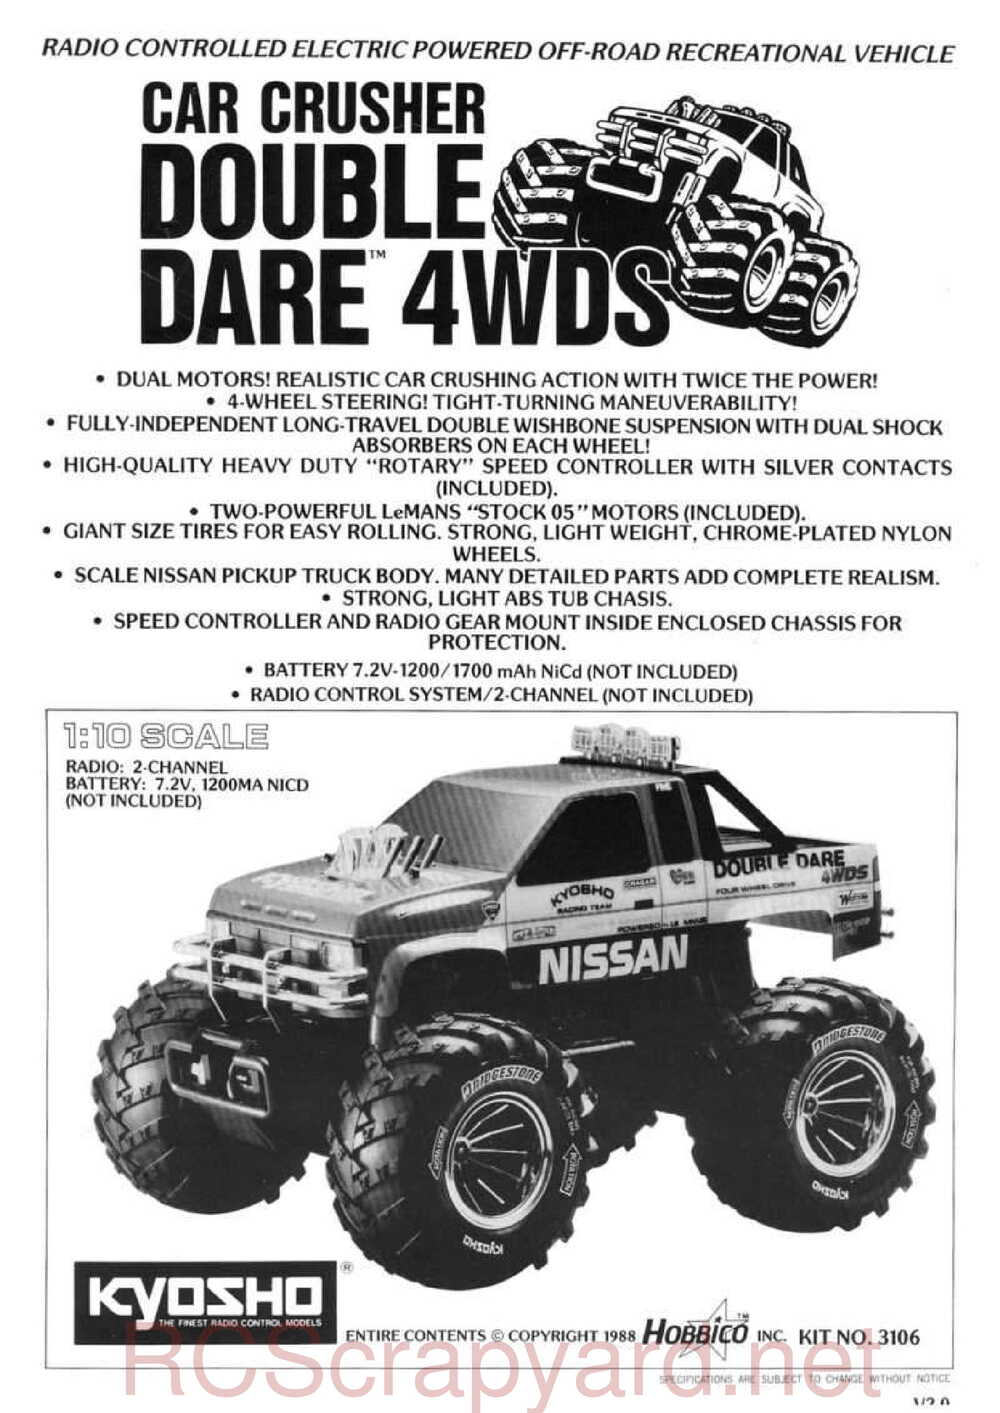 Kyosho - 3106 - Double-Dare - Manual - Page 01